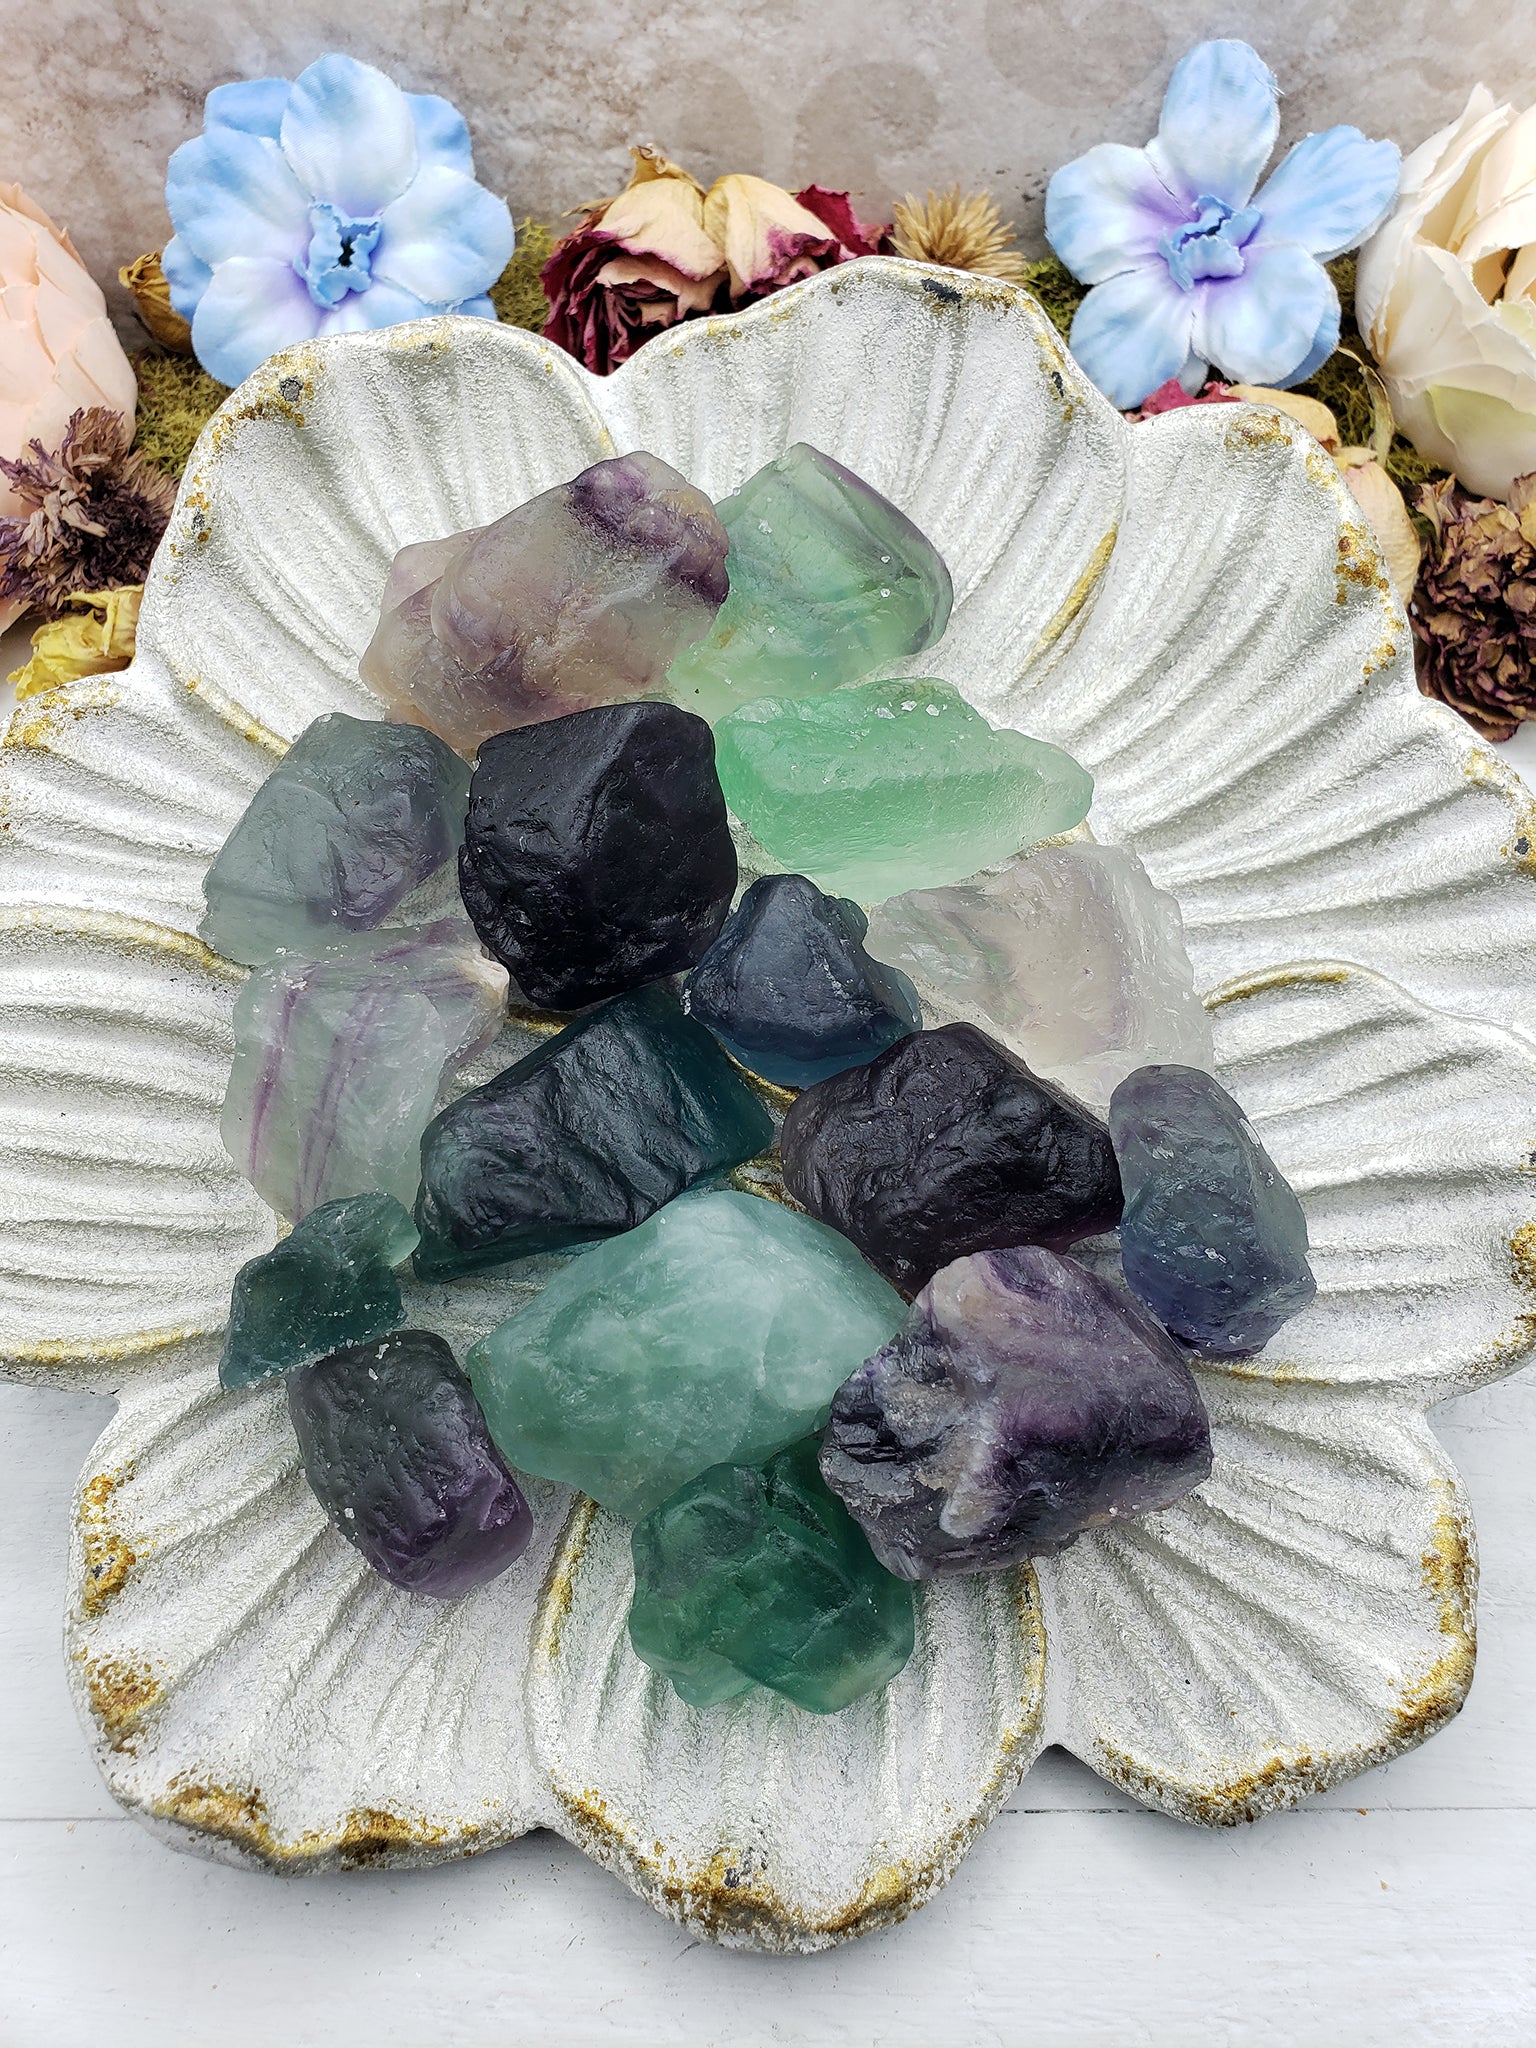 rough fluorite crystal pieces on floral display dish